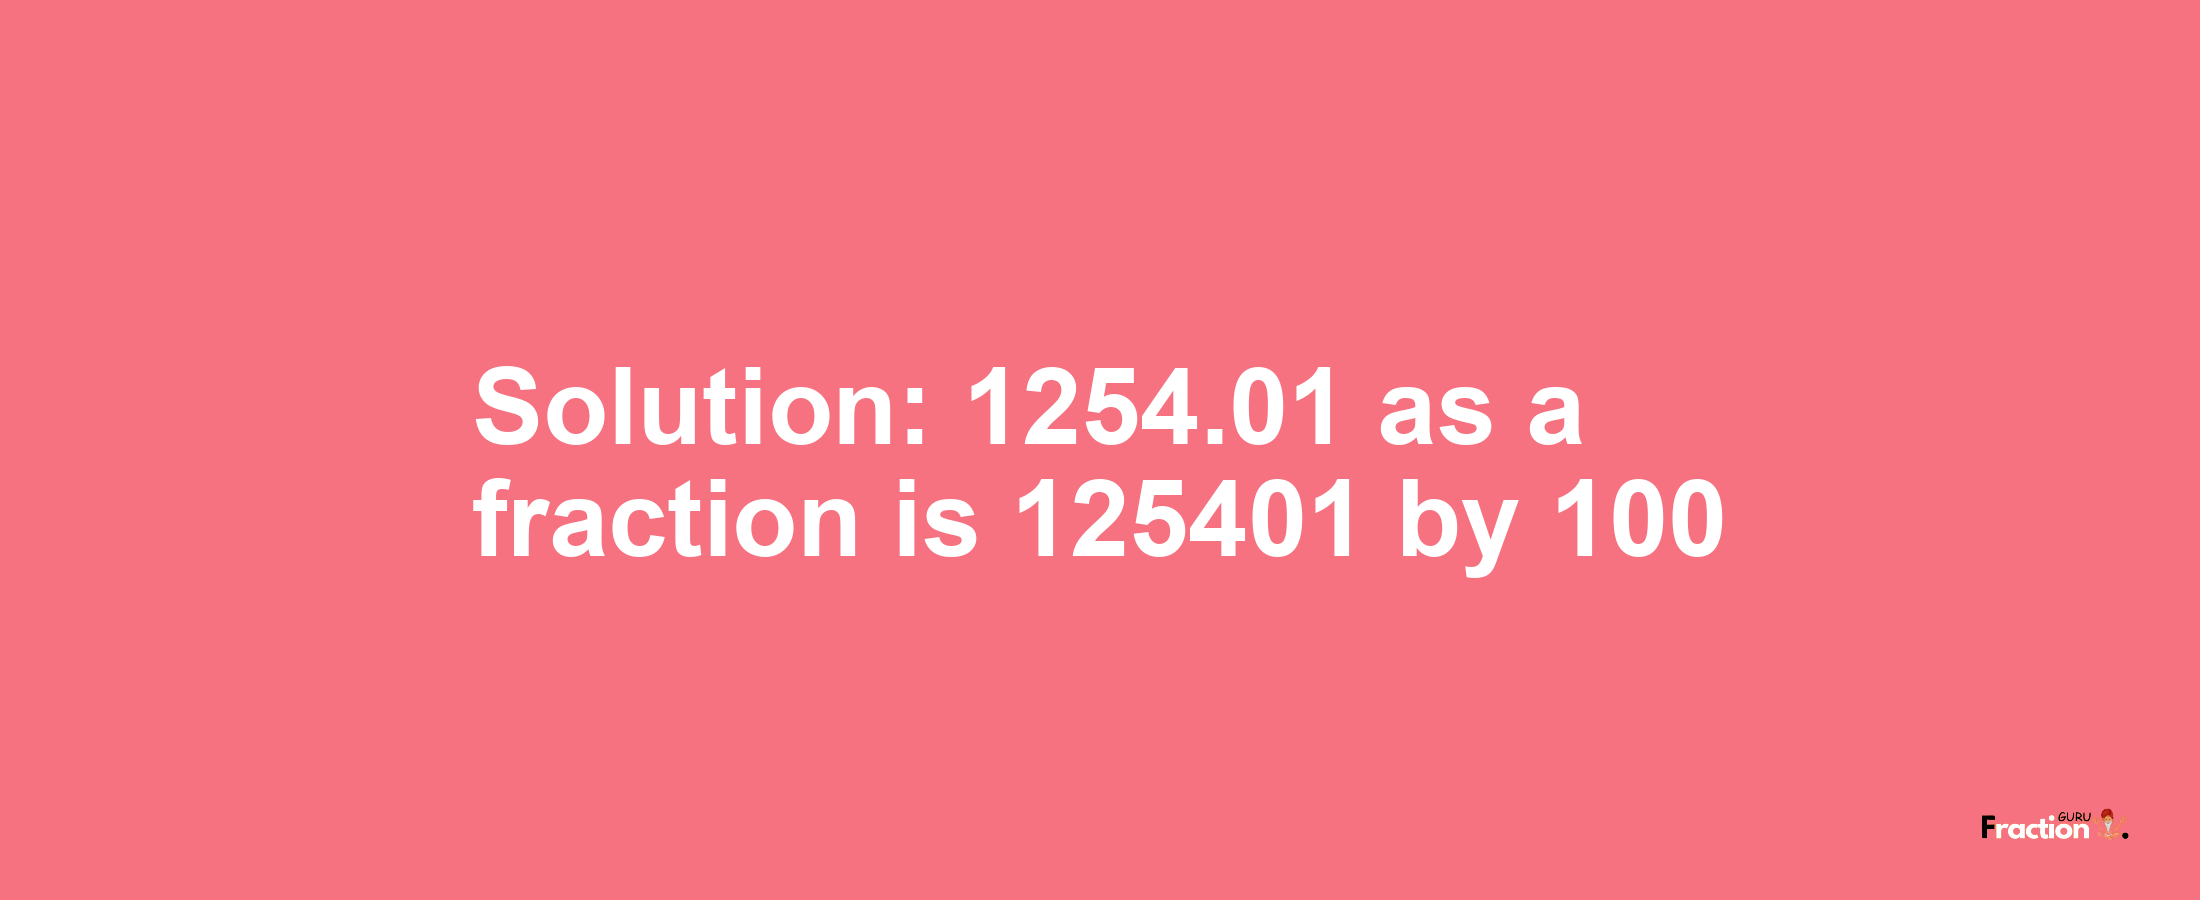 Solution:1254.01 as a fraction is 125401/100